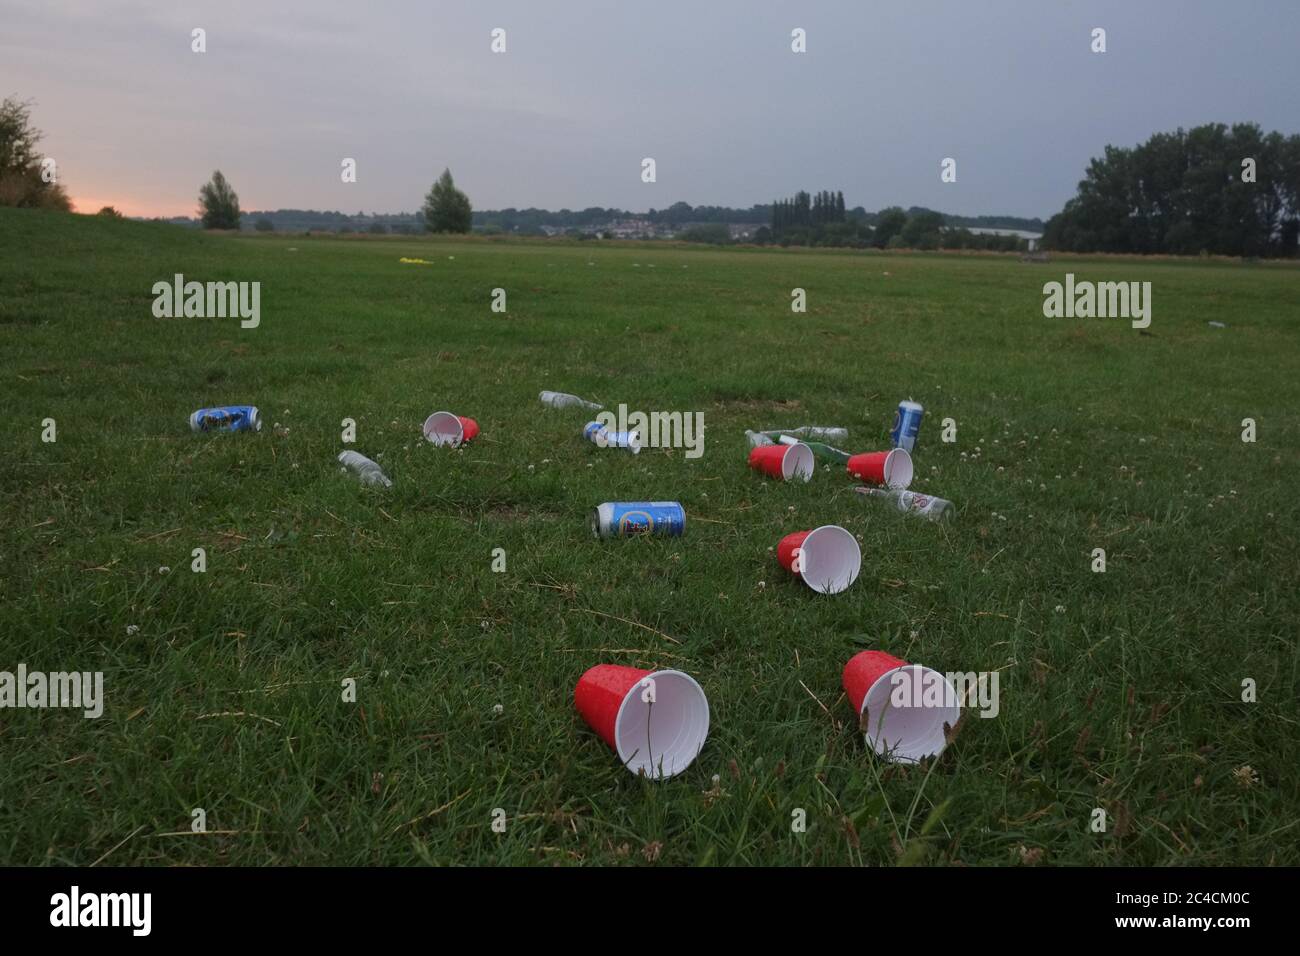 Hertford, UK. 26th June, 2020. A lot of rubbish has been left near bins and strewn across the park in Hartham Common after a sunny day yesterday. Harham Common is a park found near the town centre of of Hertford and the suburb of Bengeo. Credit: Andrew Steven Graham/Alamy Live News Stock Photo